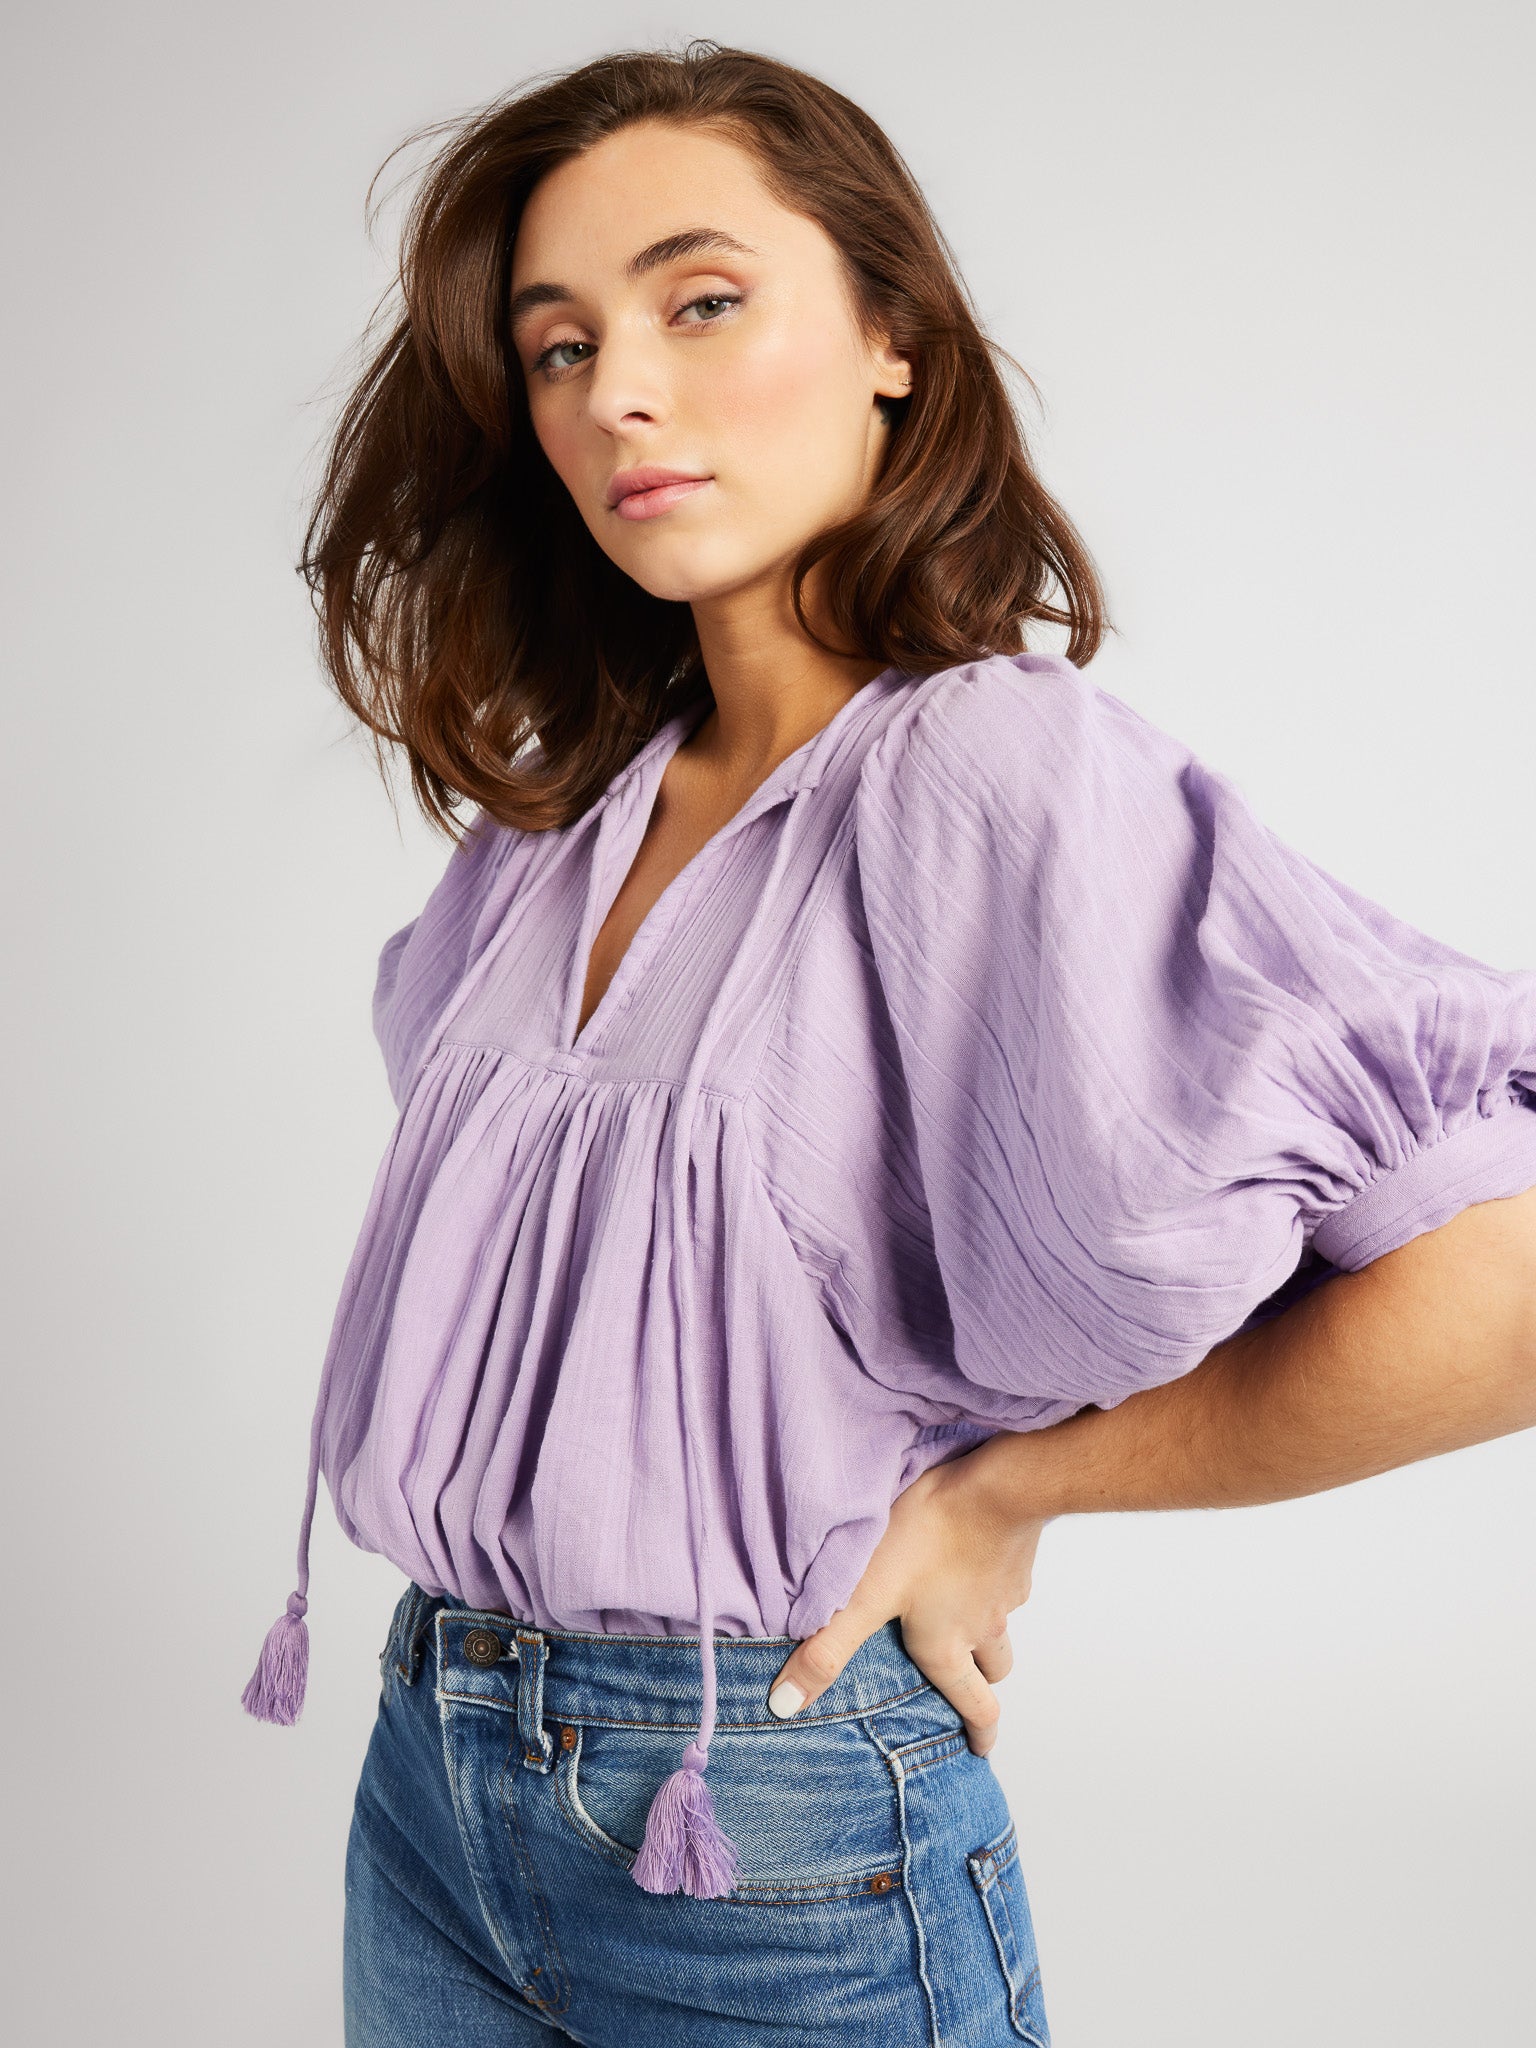 MILLE Clothing Thalia Top in Taffy Double Gauze